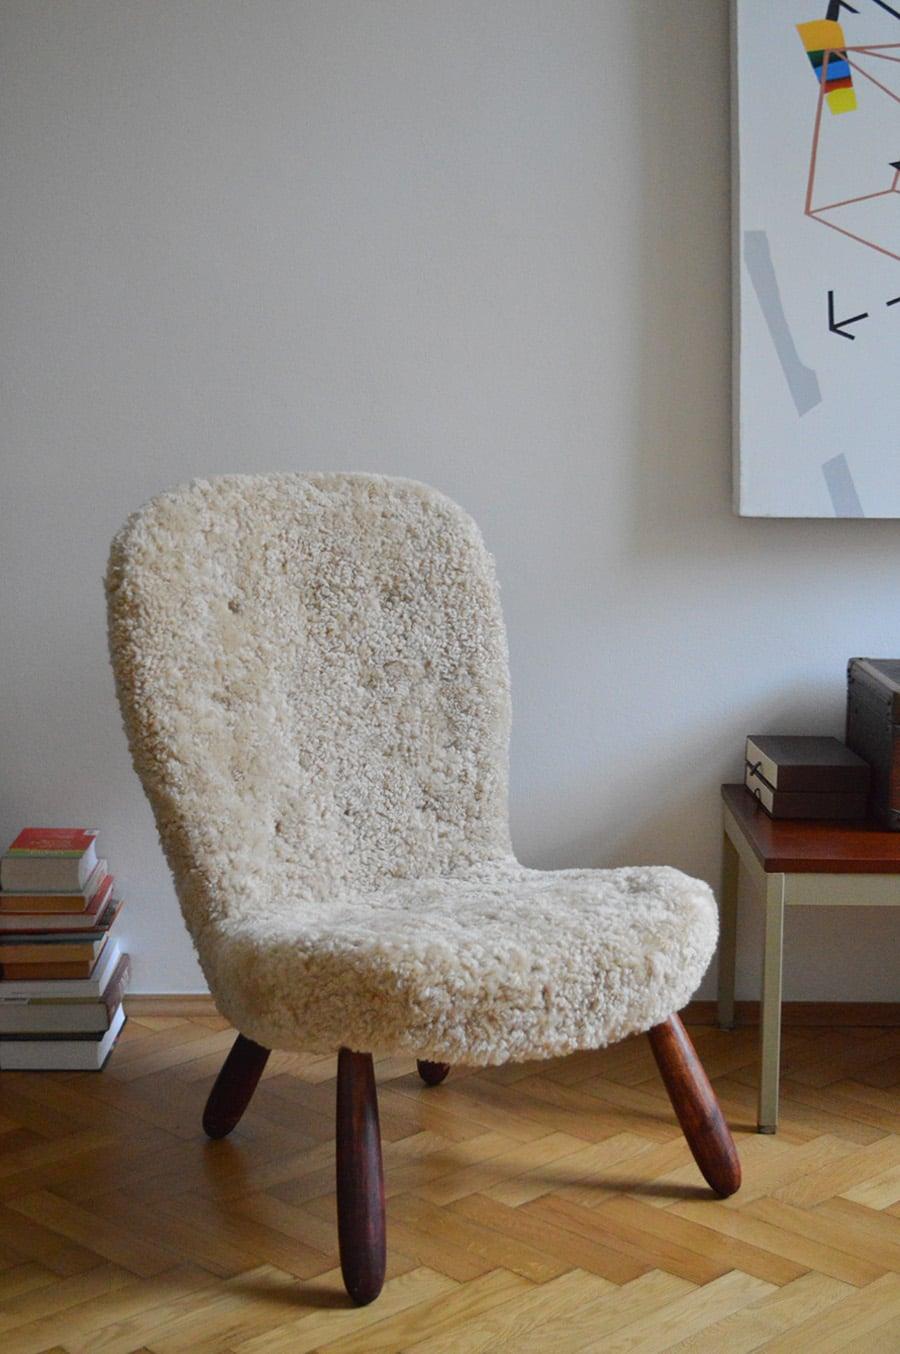 Rare easy chair (also known as Clam Chair) designed by Arnold Madsen for Madsen & Schubell in Denmark, 1940s.

Perhaps one of the rarest examples of Danish craftsmanship and a rare piece to come to market, this armless Clam Chair was designed by